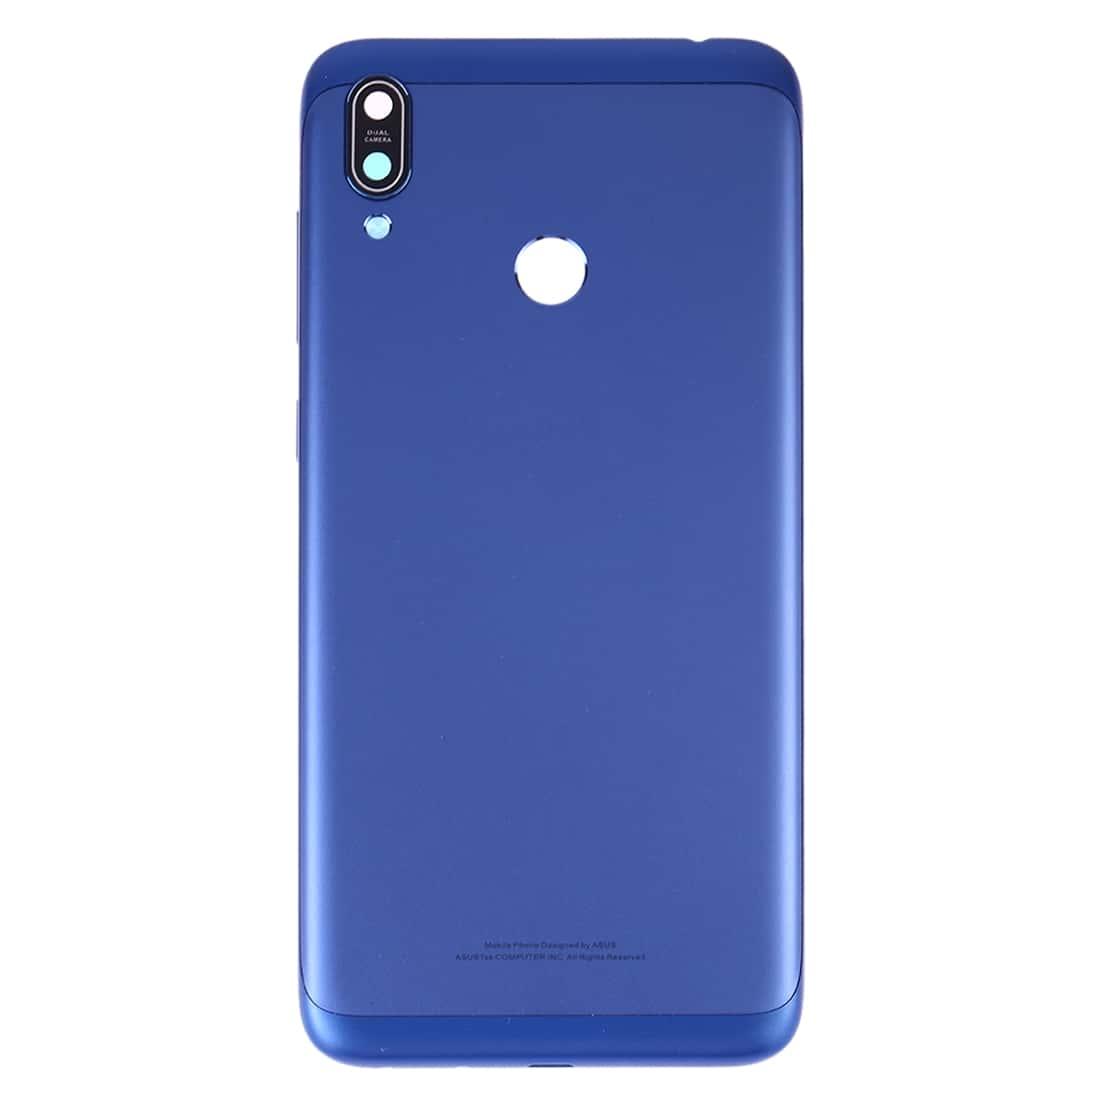 Back Panel Housing Body for Asus Zenfone Max M2 Blue with Camera Lens